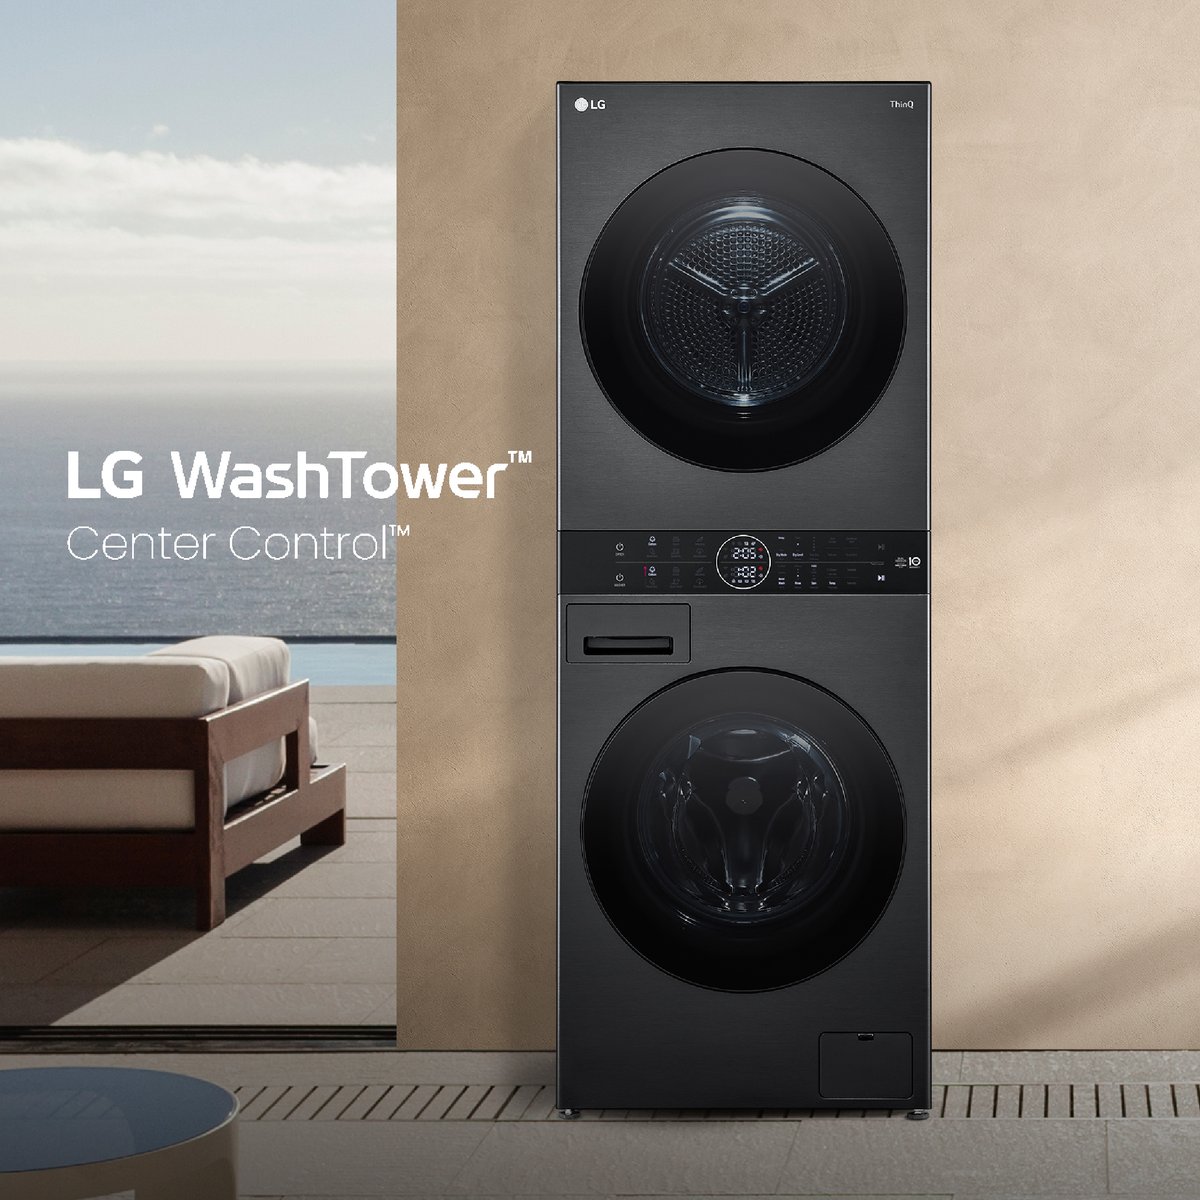 Washer + Dryer = LG Washtower. 👏🏻 
Everything in one. 
All the cleaning power, half the footprint. 
Look good, do laundry even better, only with LG! 
Learn More: lge.ai/6013ekaXX

#LG #Washtower #LGWashingMachine #Dryer #LGGulf #AllinOne #LifesGood